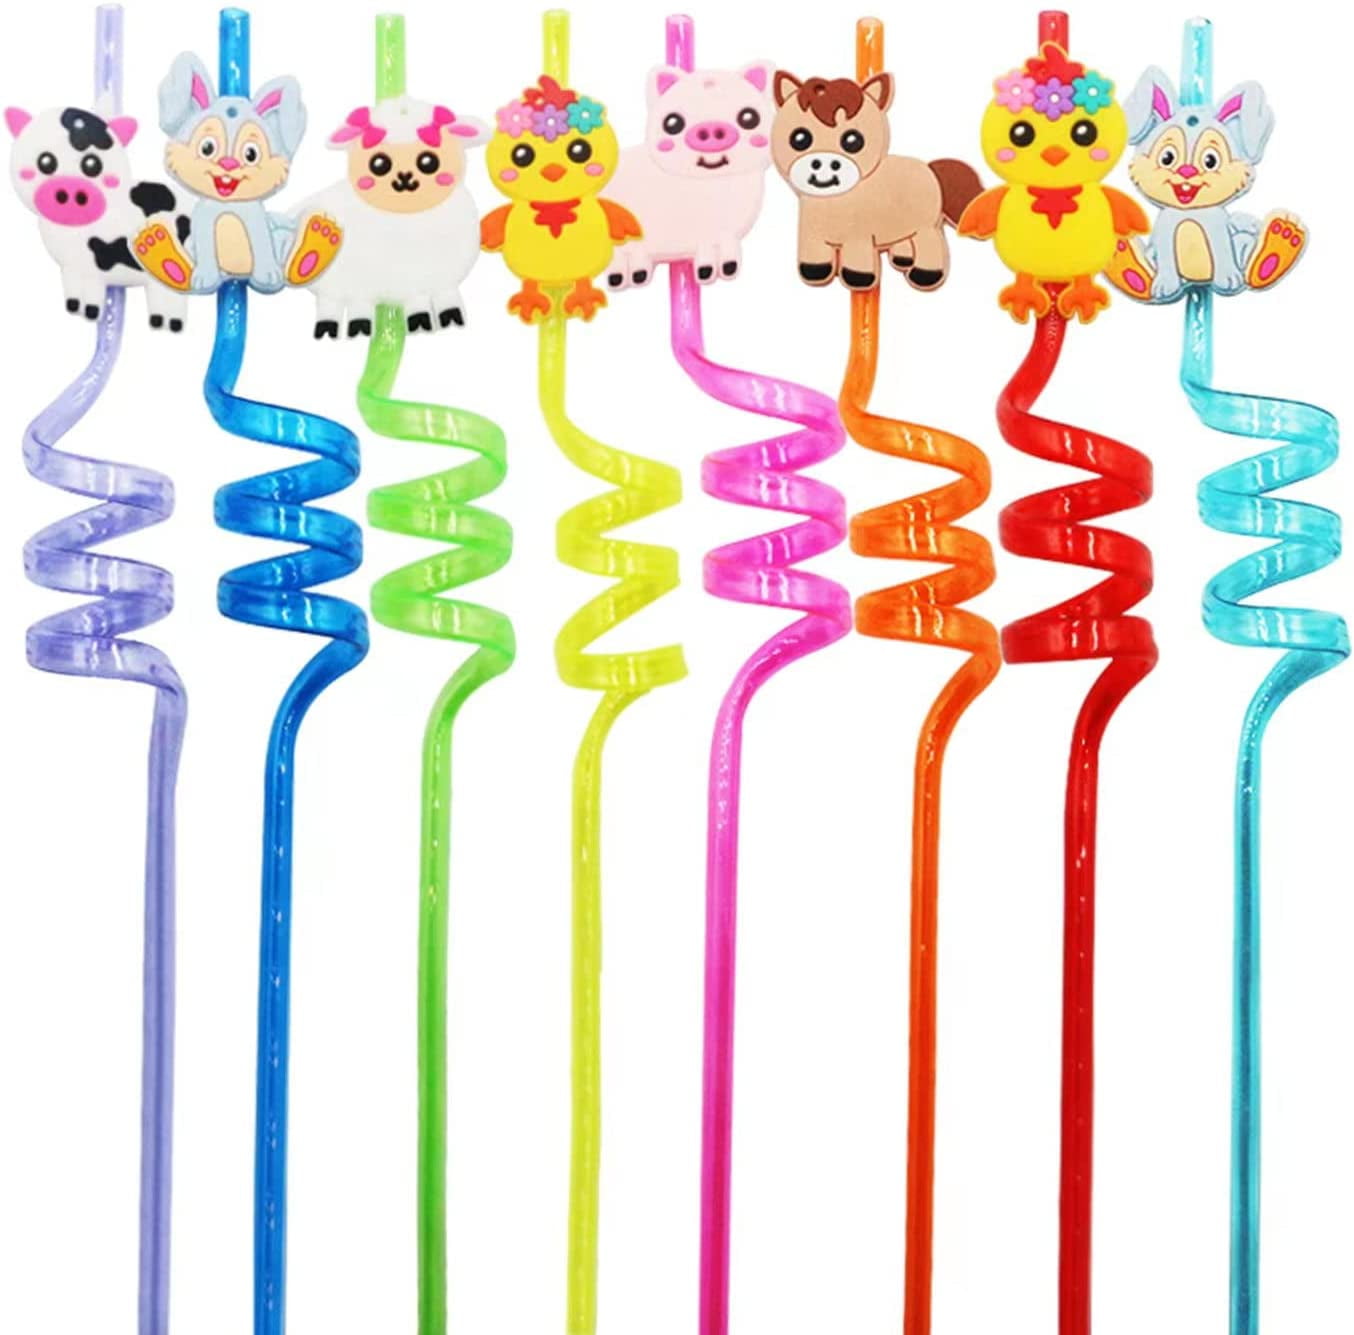 Disney Mickey Mouse Plastic Straw Children's Birthday Party Decor Colorful  Reusable Eco Straw Children Straws Party Supplies